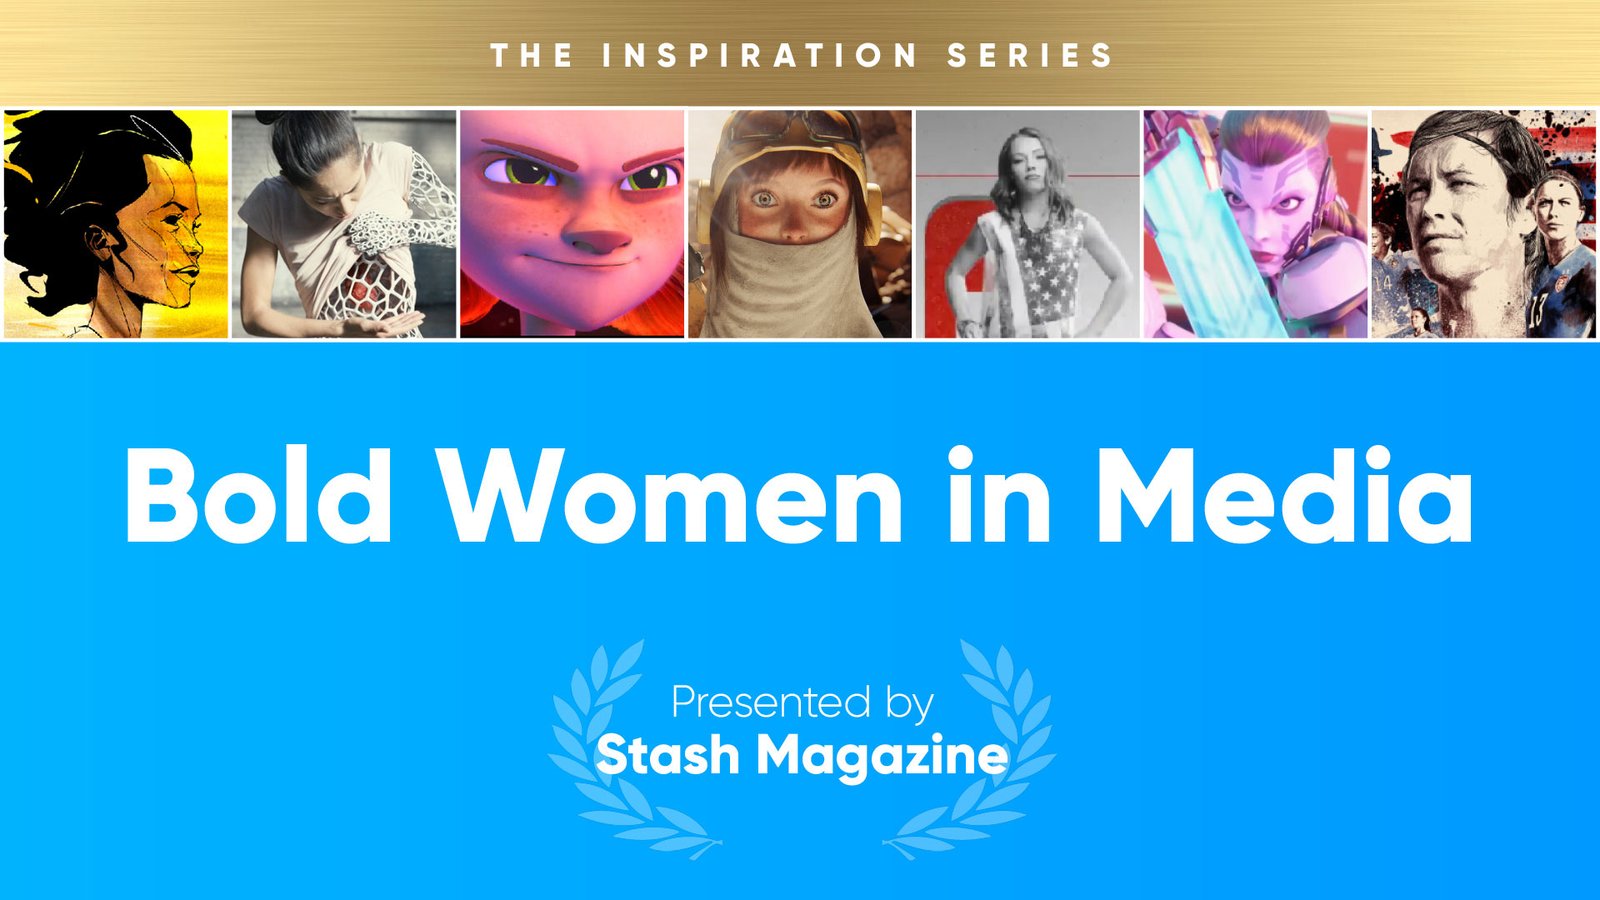 The Inspiration Series: Bold Women in Media